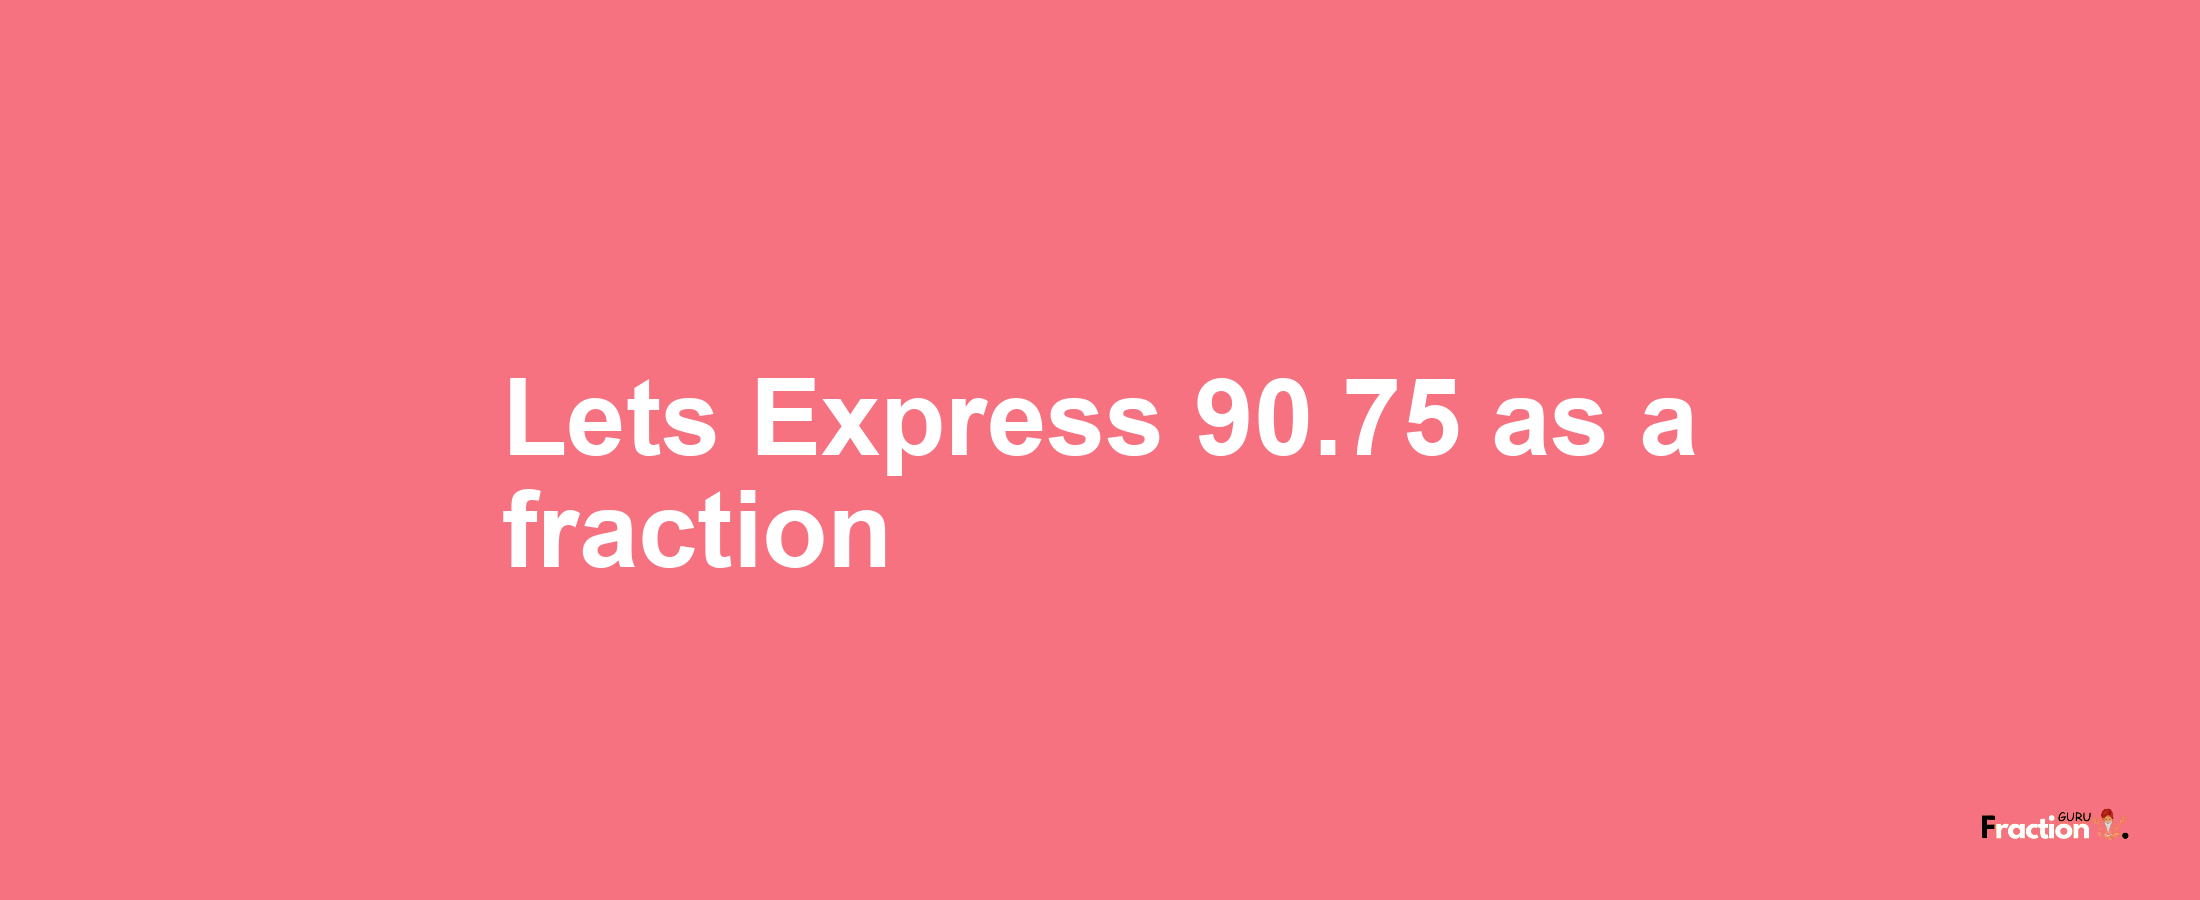 Lets Express 90.75 as afraction